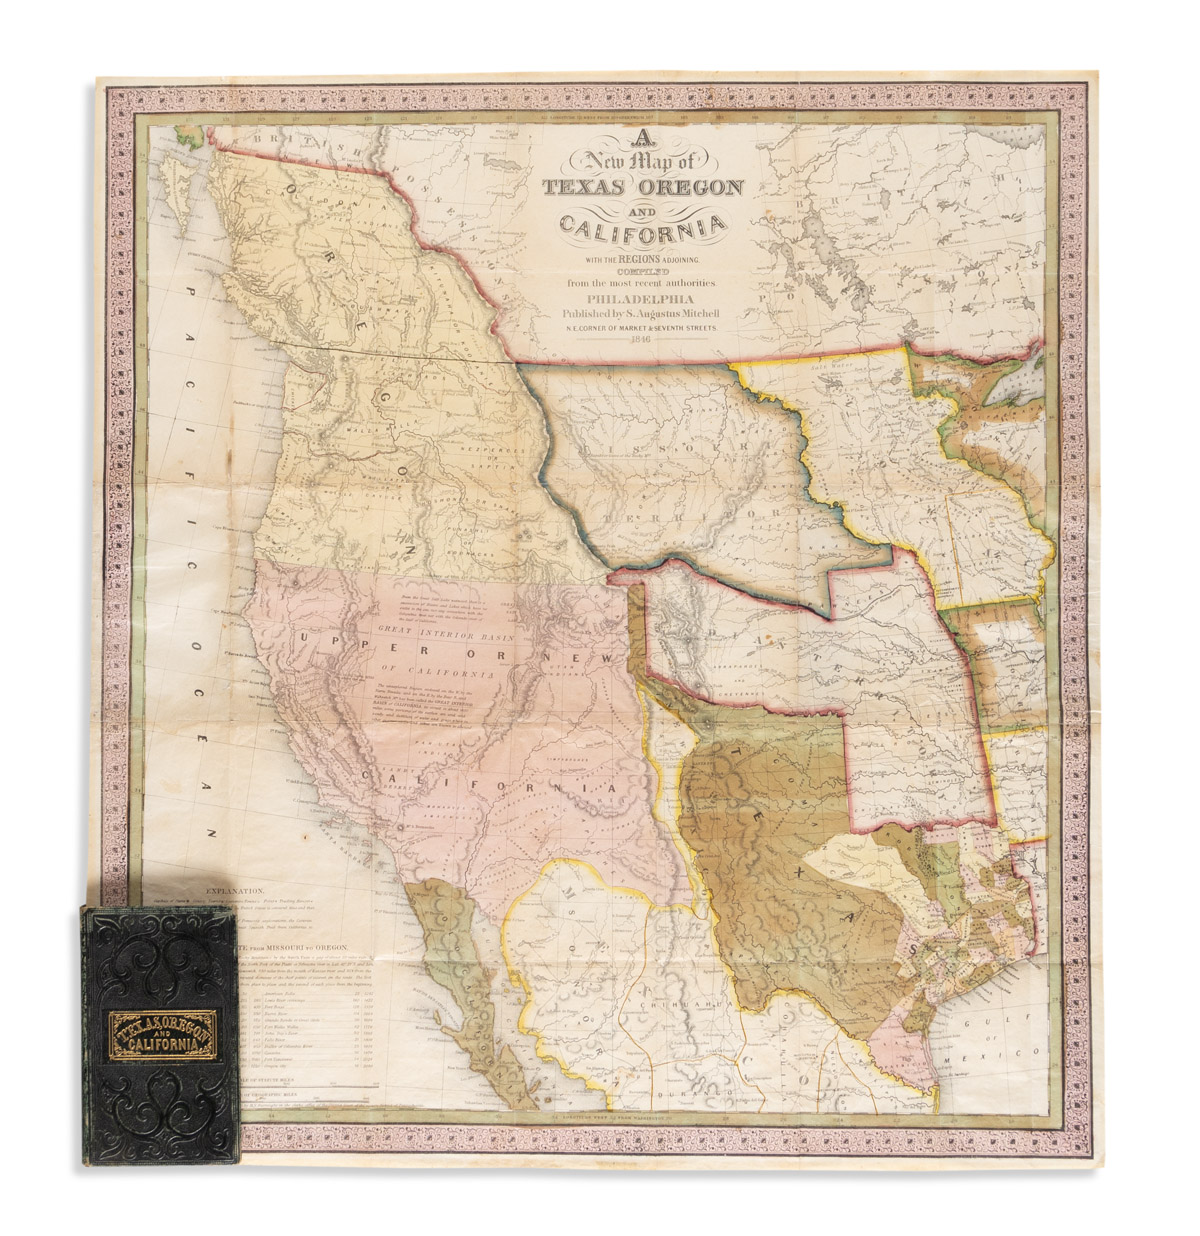 MITCHELL, S. AUGUSTUS. A New Map of Texas, Oregon and California.